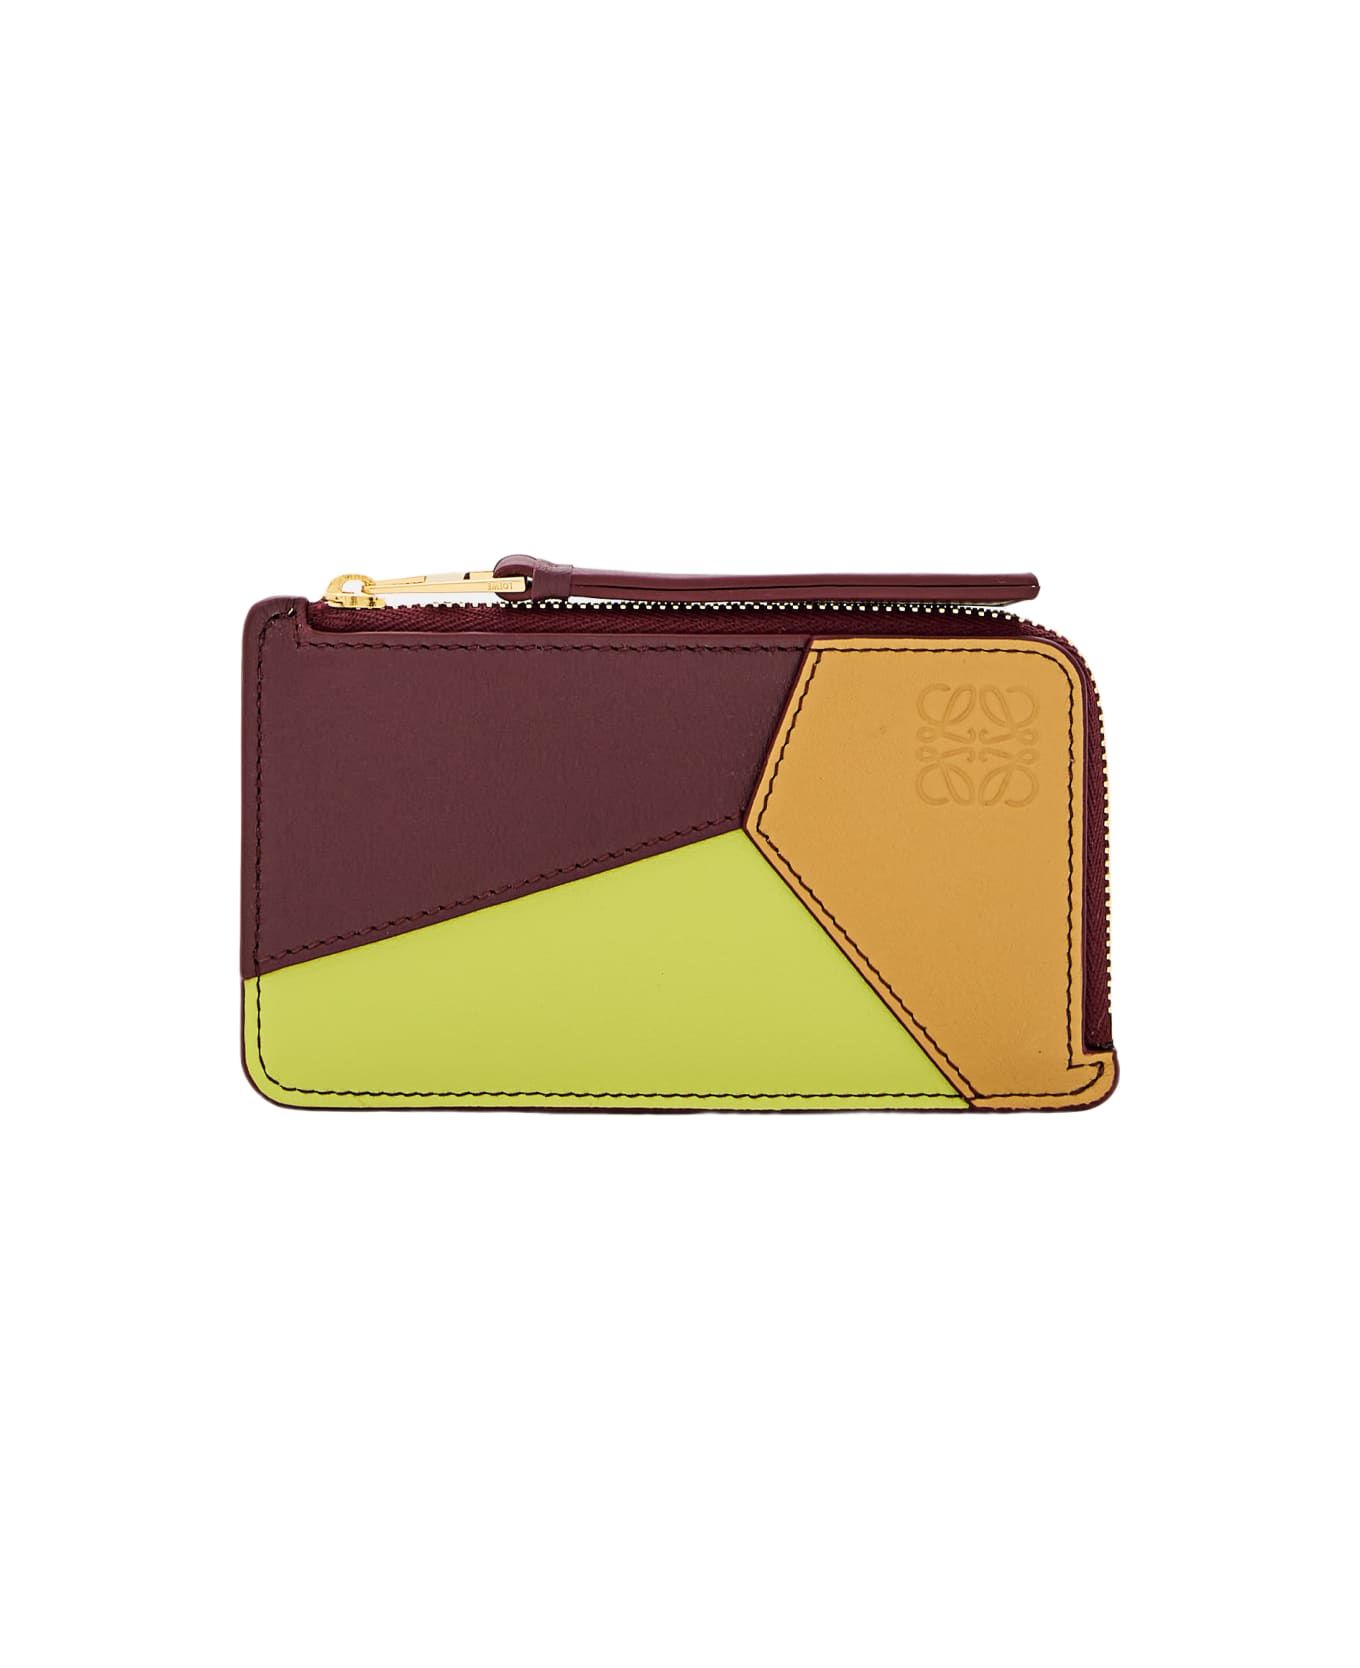 loewe almost Grey Coin Leather Cardholder - MultiColour